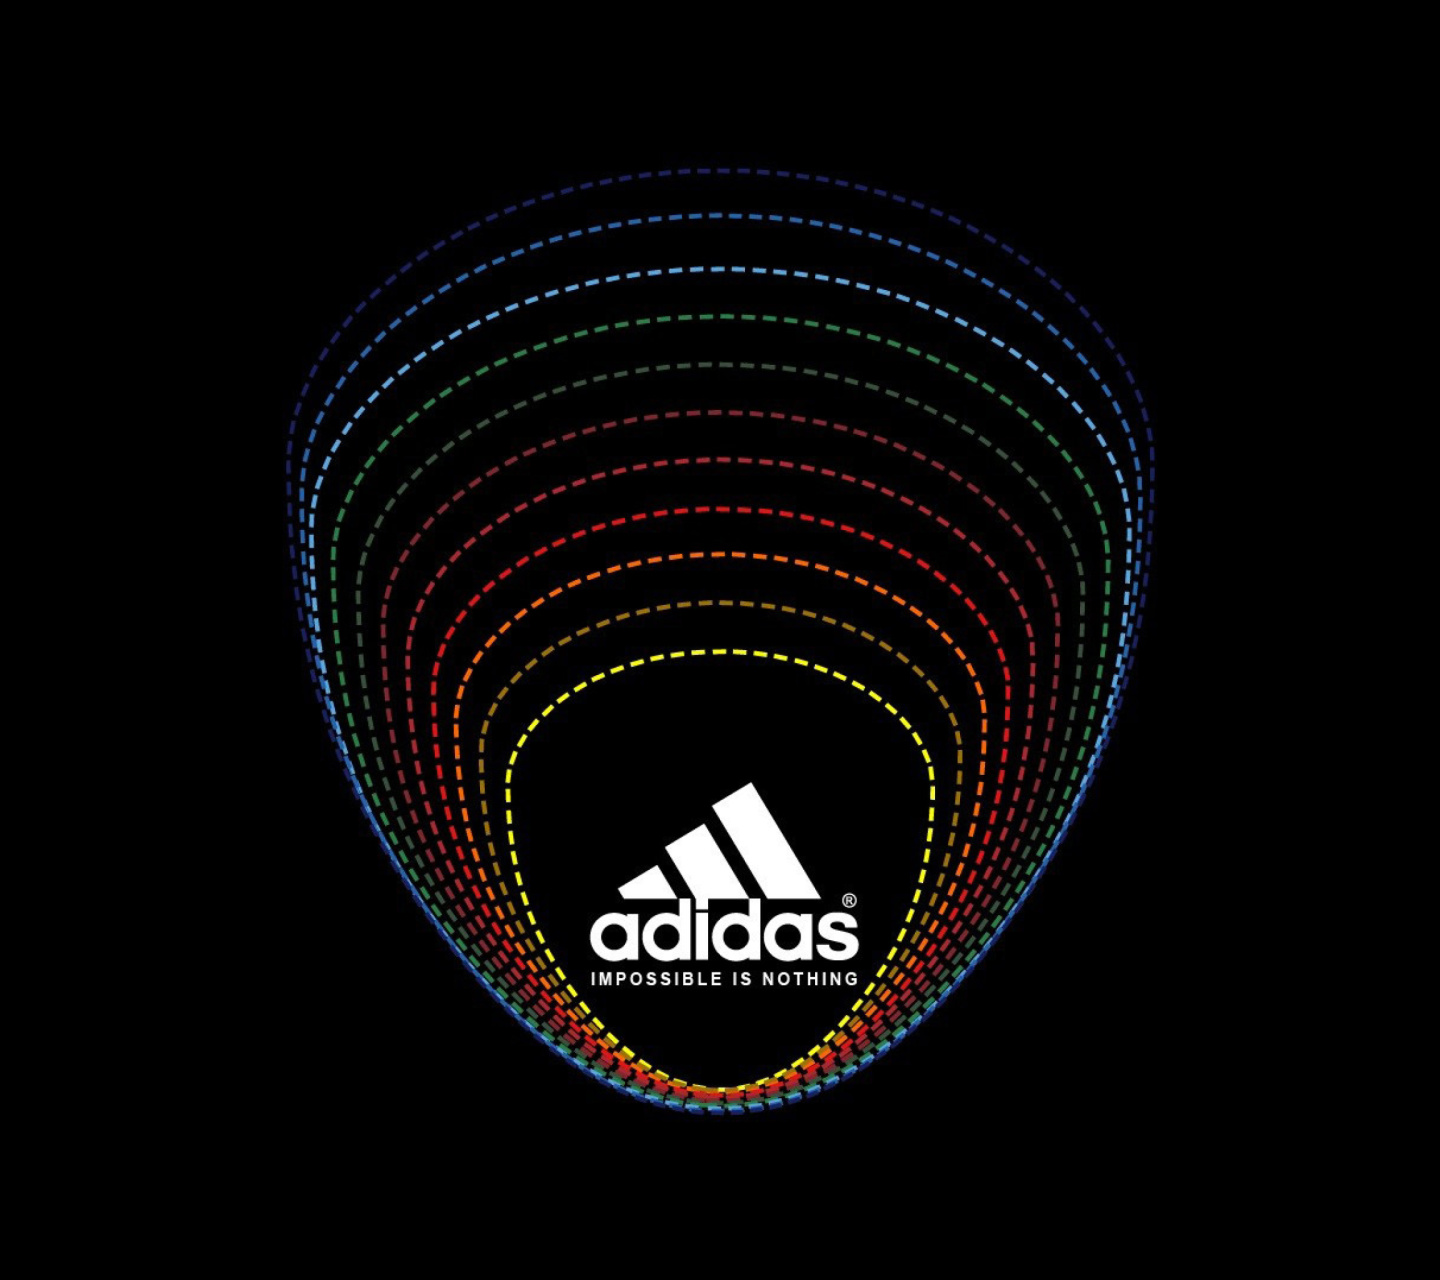 Обои Adidas Tagline, Impossible is Nothing 1440x1280